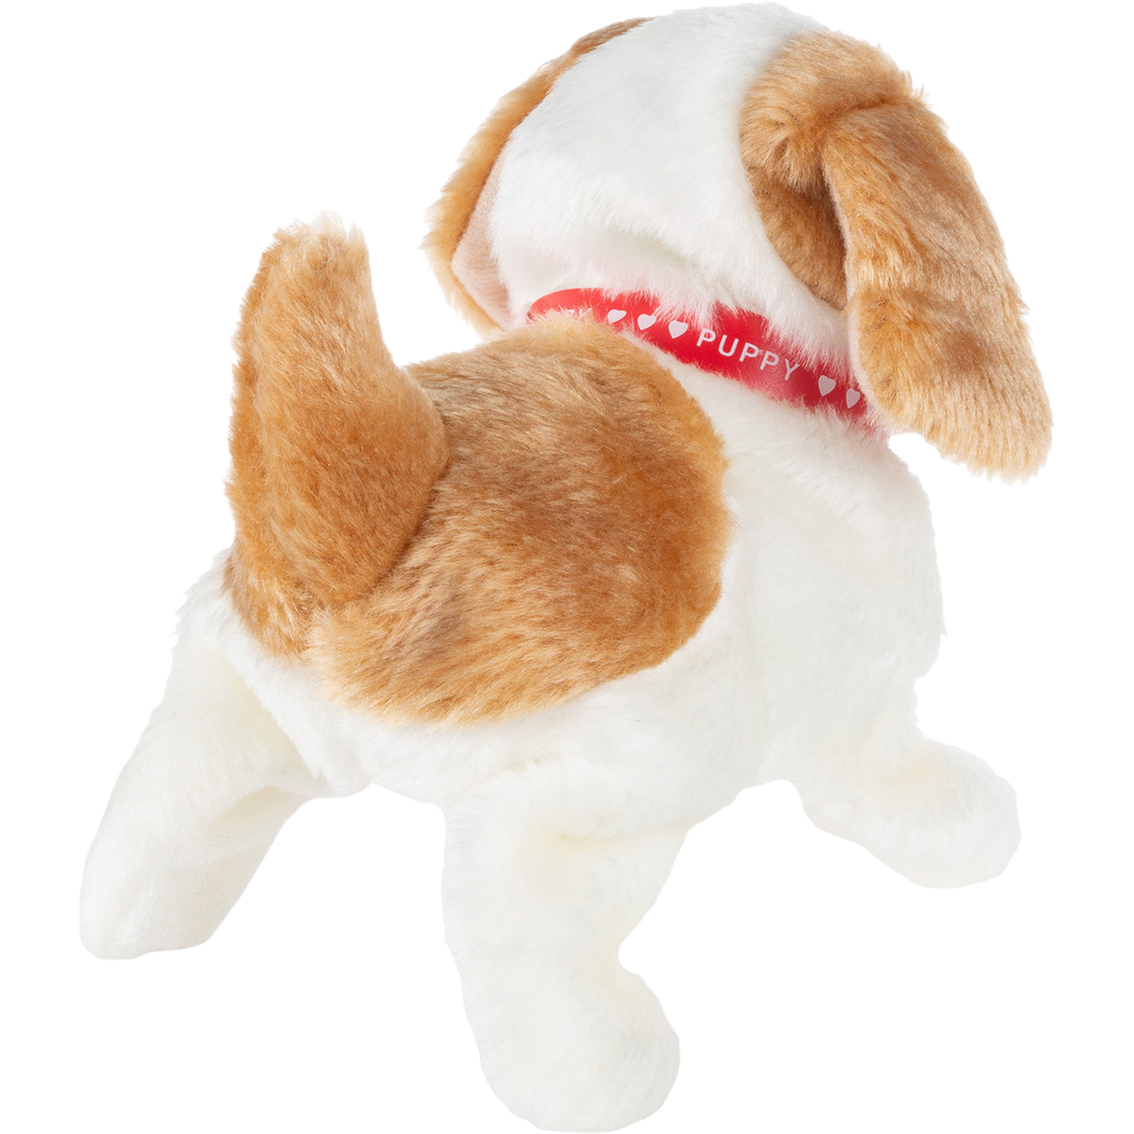 Happy Trails Interactive Plush Puppy Toy - Image 6 of 8